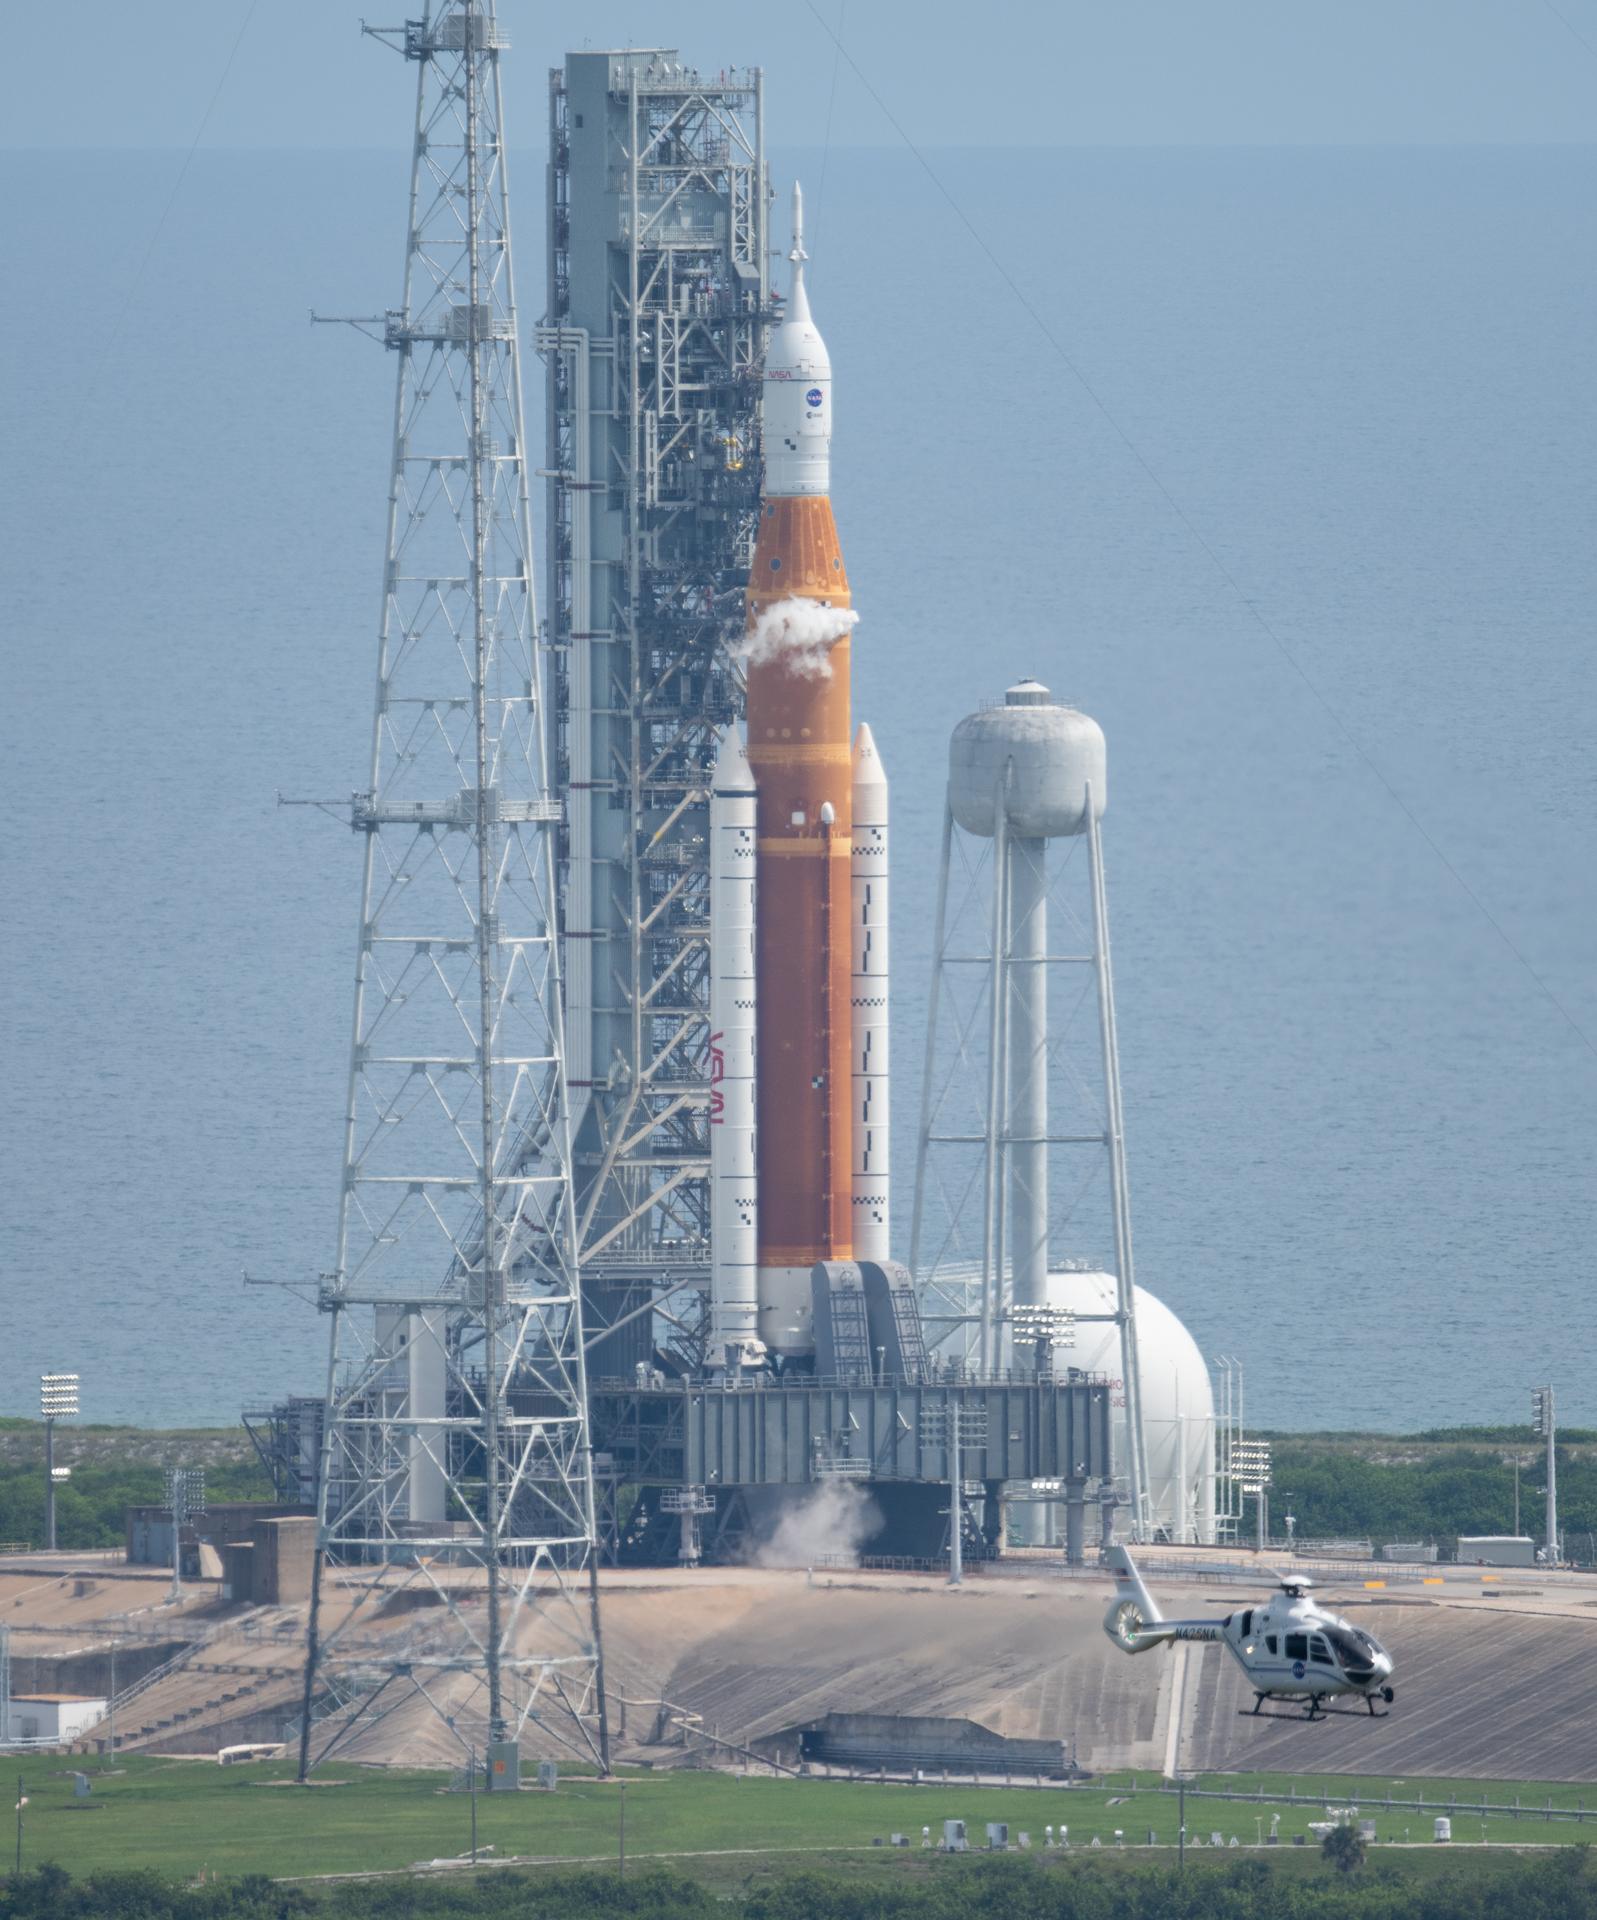 Nasa’s Space Launch System rocket and Orion spacecraft, the Artemis I mission, on the launch pad at Cape Canaveral Florida on 3 September